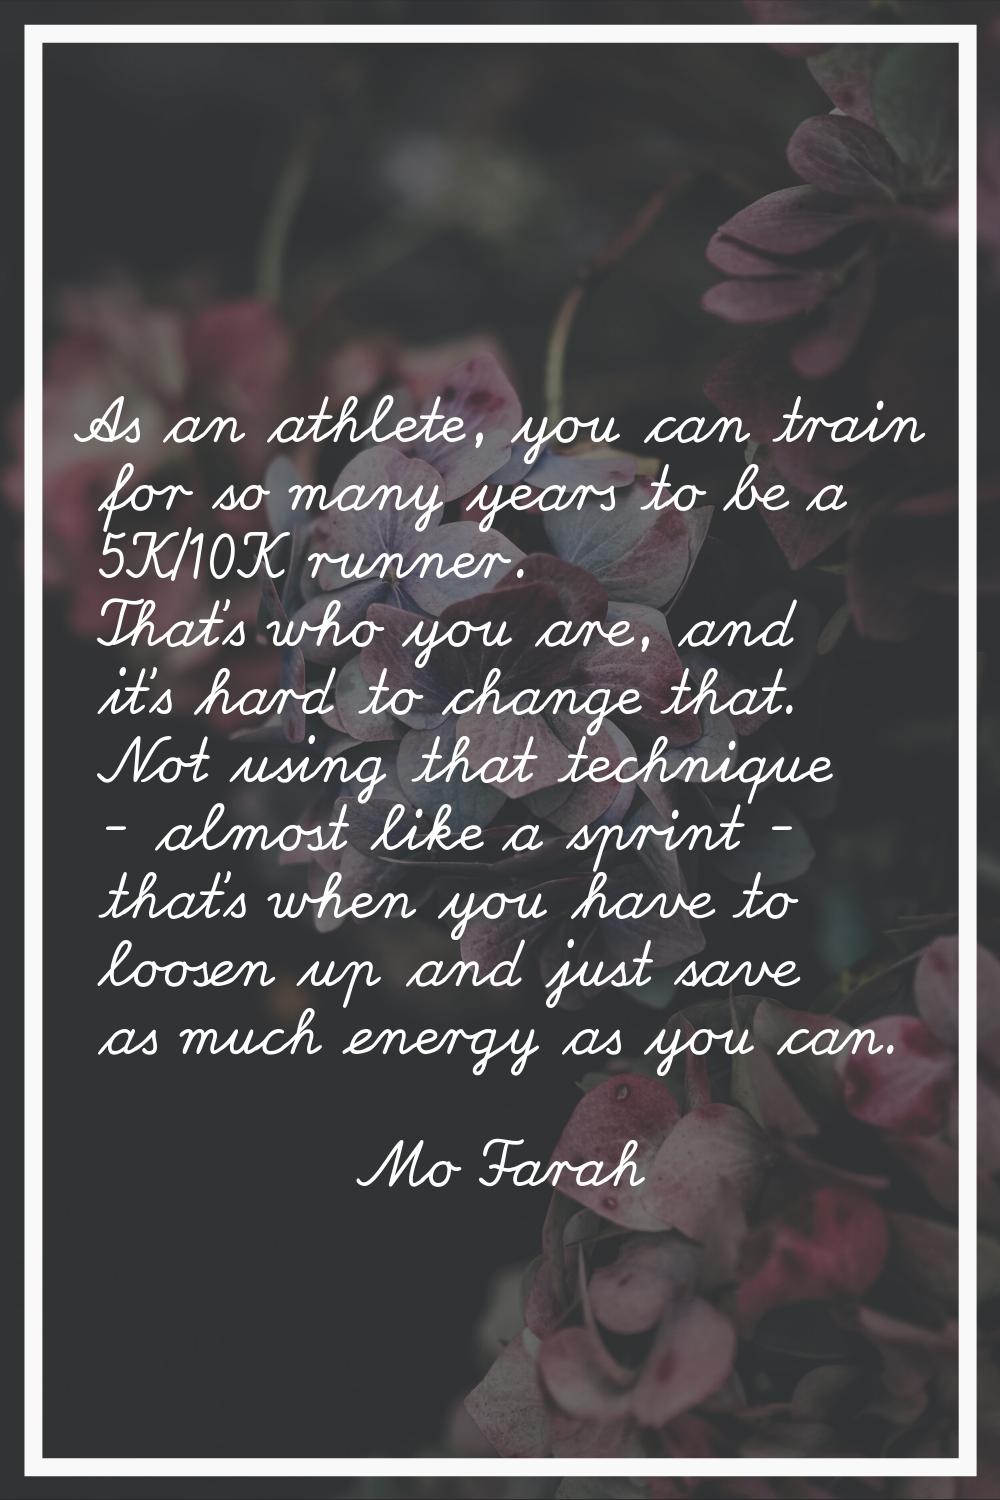 As an athlete, you can train for so many years to be a 5K/10K runner. That's who you are, and it's 